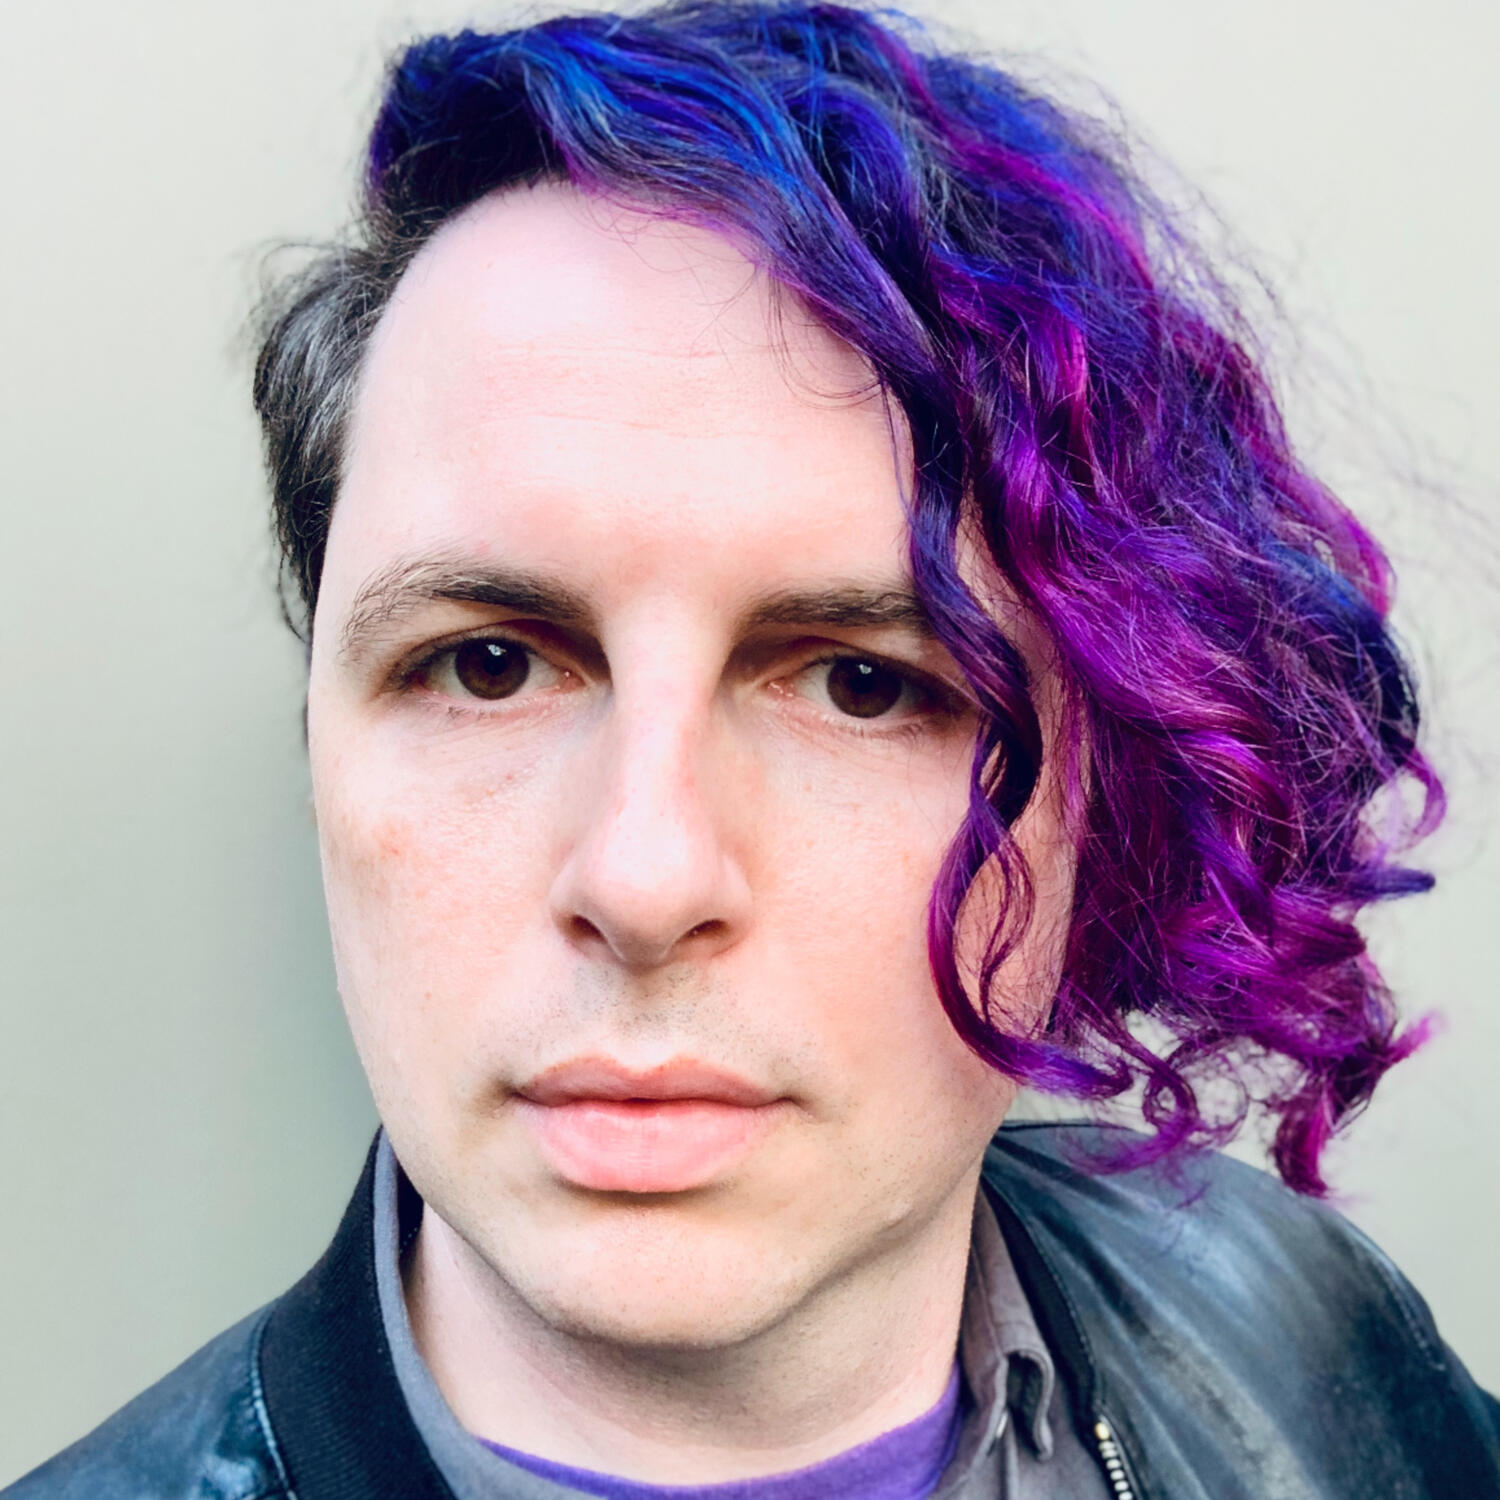 Tom Lowenthal — a pale white person with brown eyes rosy cheeks looks directly at you. Their asymmetric hair is purple with highlights of blue and magenta.